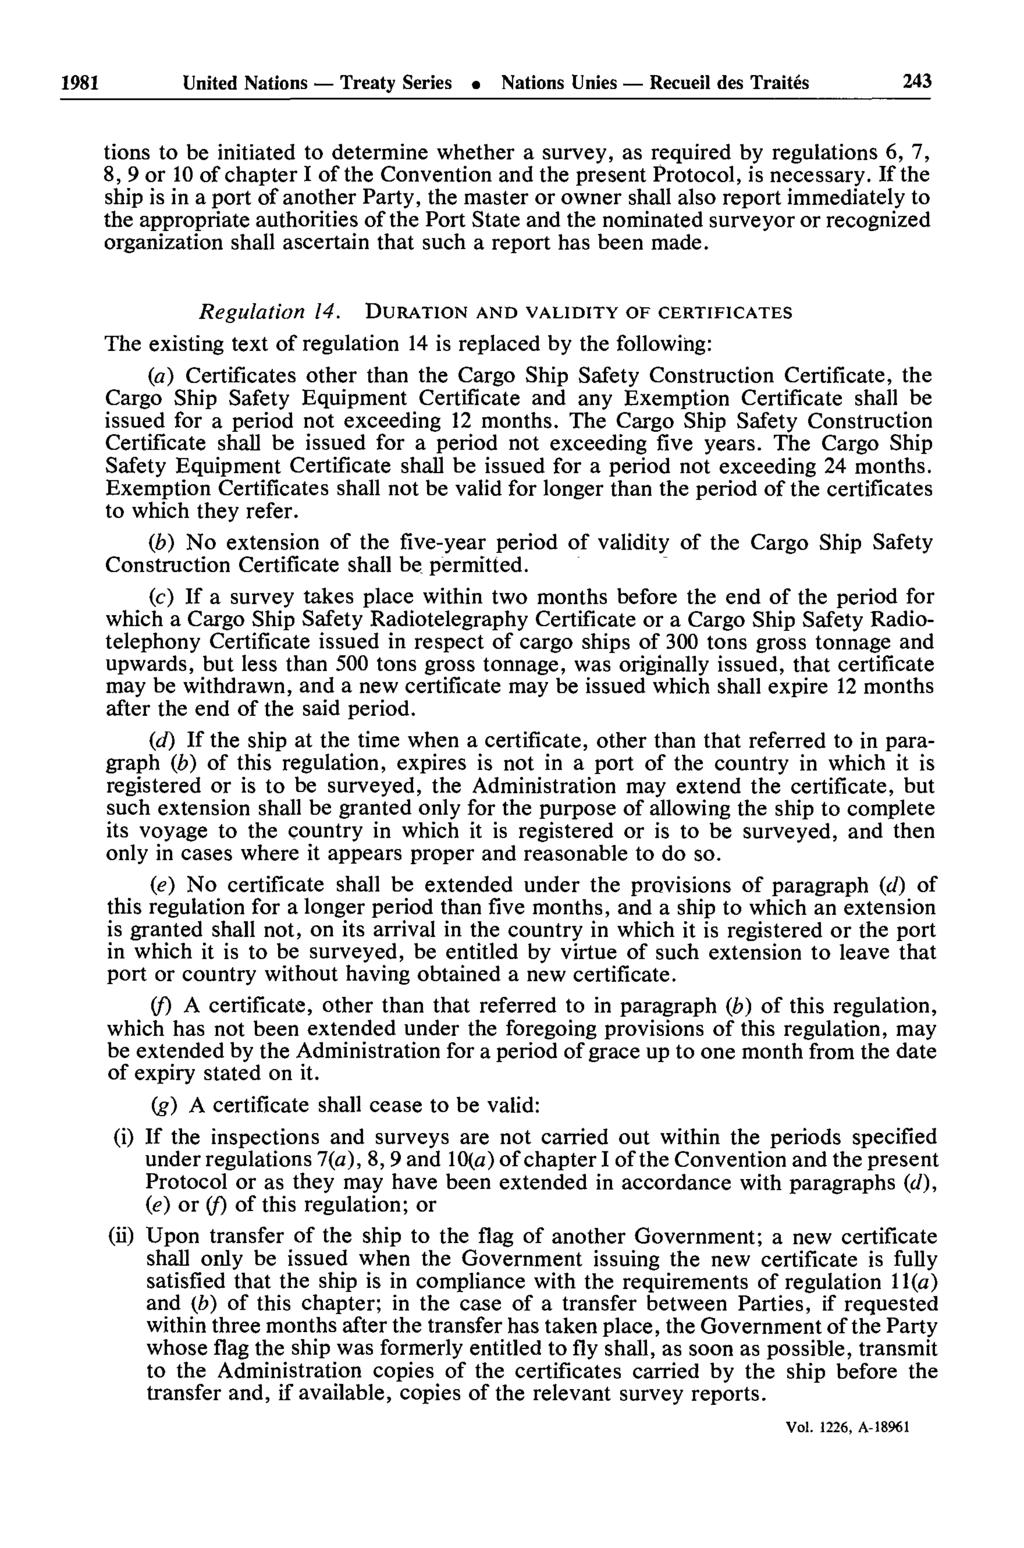 1981 United Nations Treaty Series Nations Unies Recueil des Traités 243 tions to be initiated to determine whether a survey, as required by regulations 6, 7, 8, 9 or 10 of chapter I of the Convention